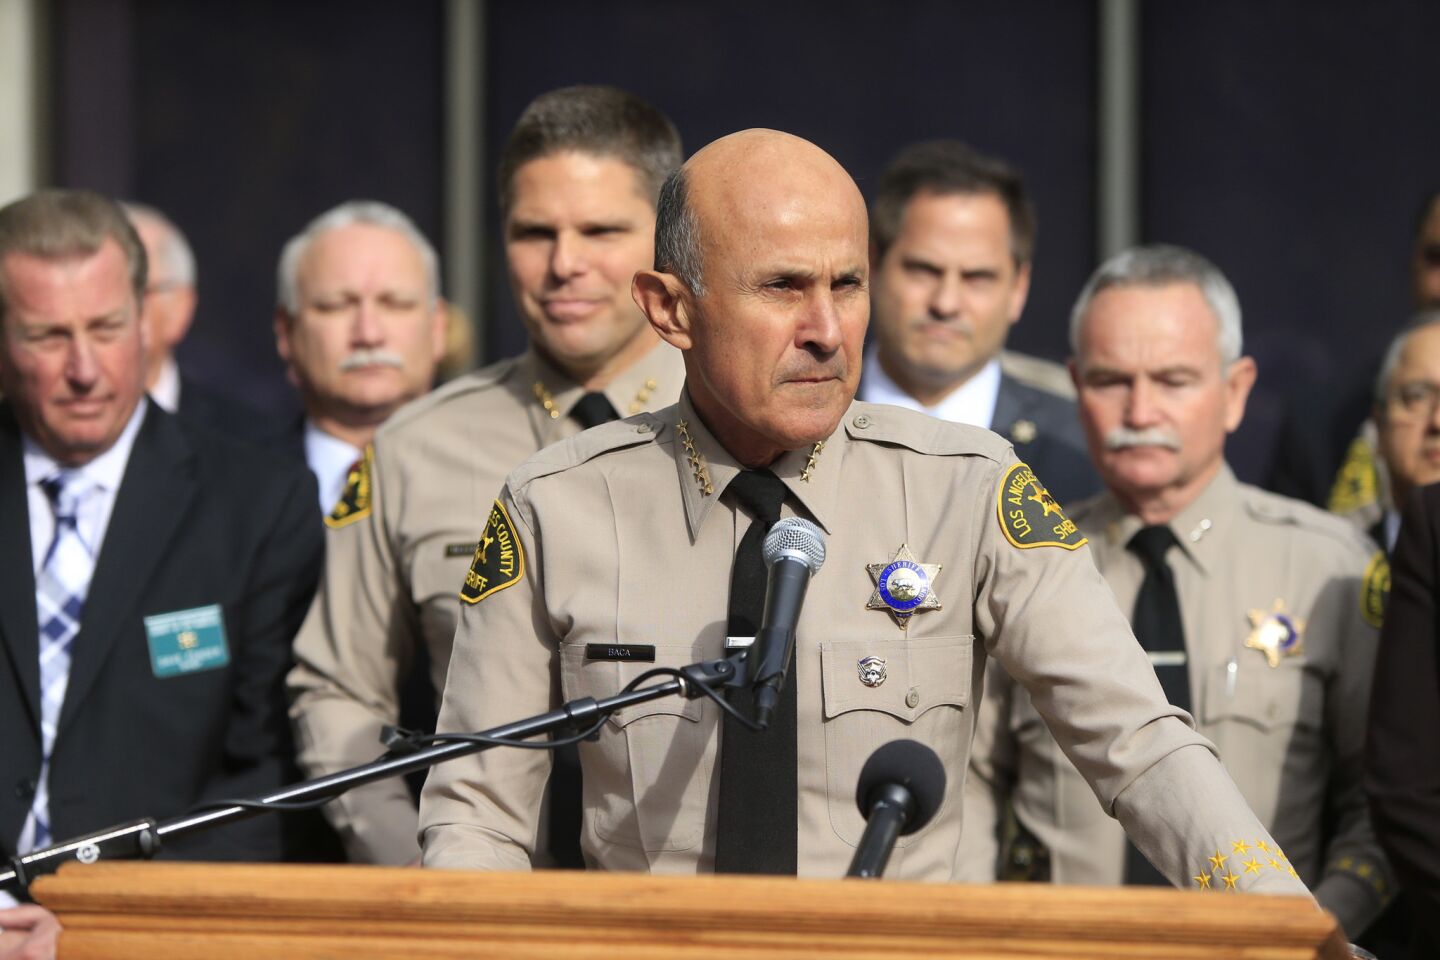 Los Angeles County Sheriff Lee Baca announces on January 7, 2014, that he will not seek a fifth term